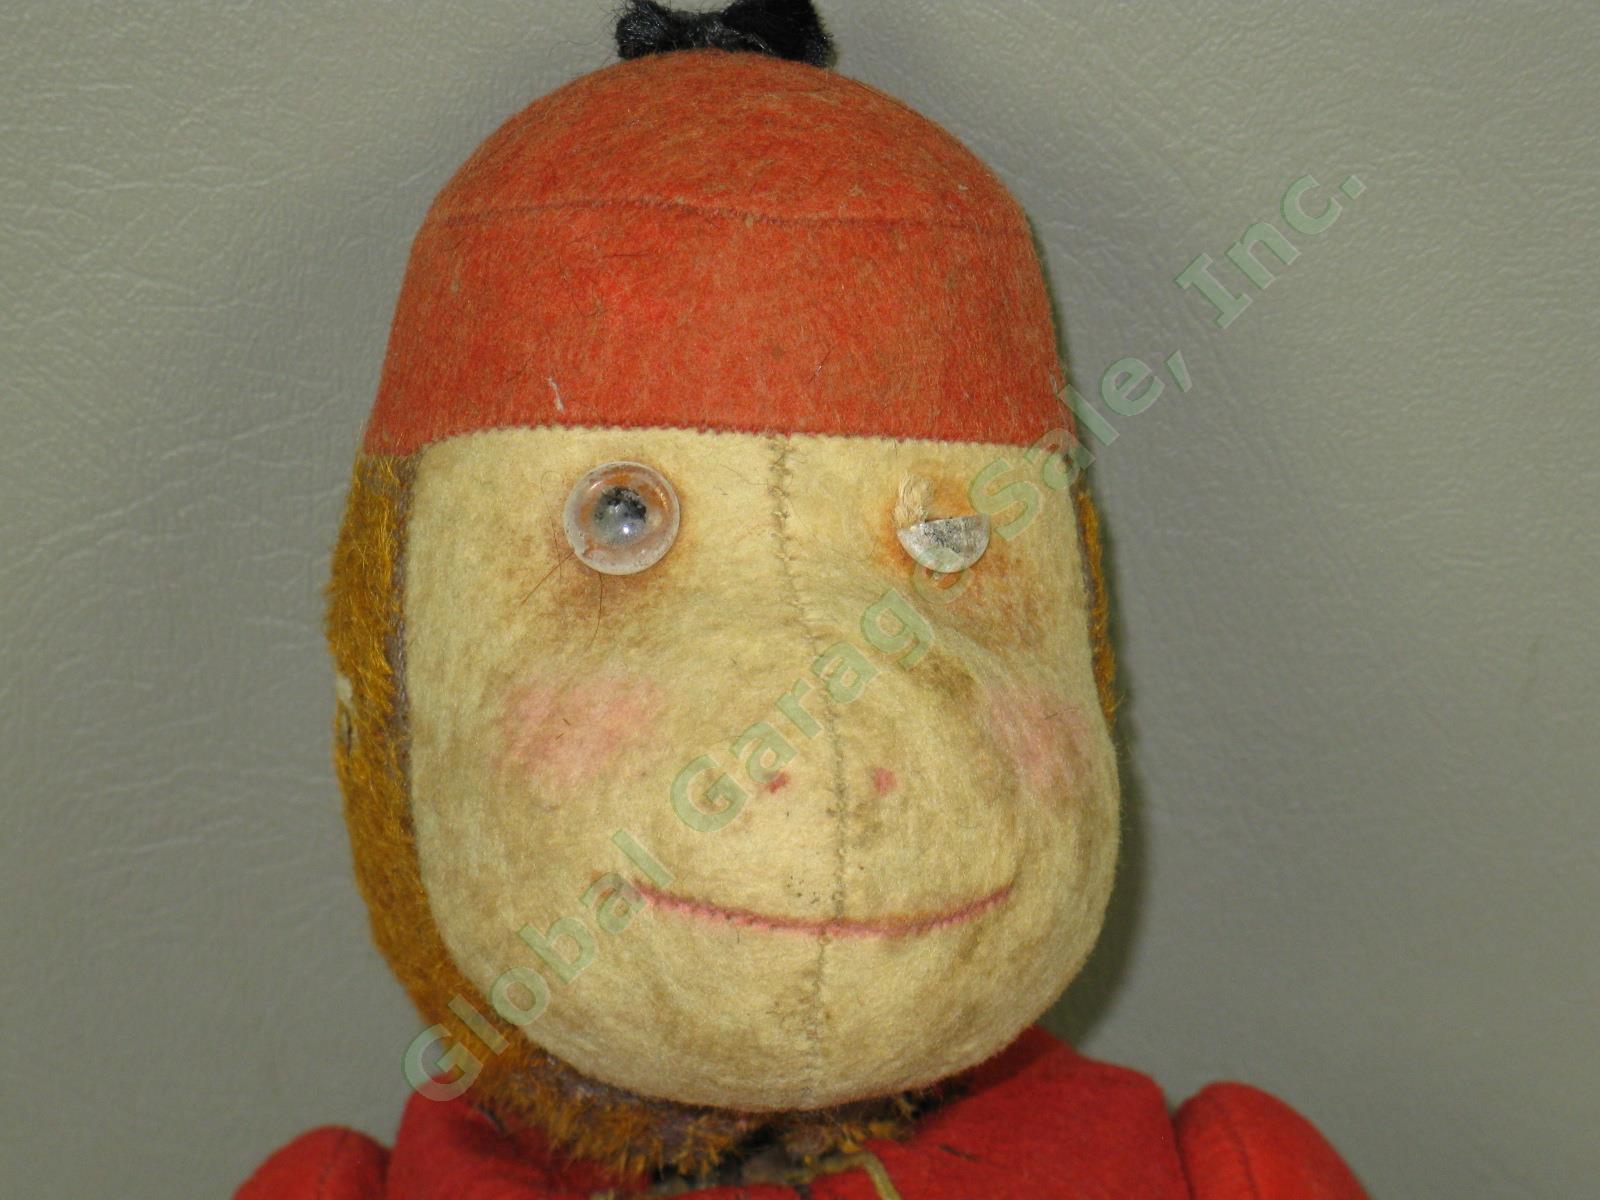 Vtg Antique 1920s Schuco Yes No Jointed Monkey Toy W/ Red Bellhop Uniform Works 1